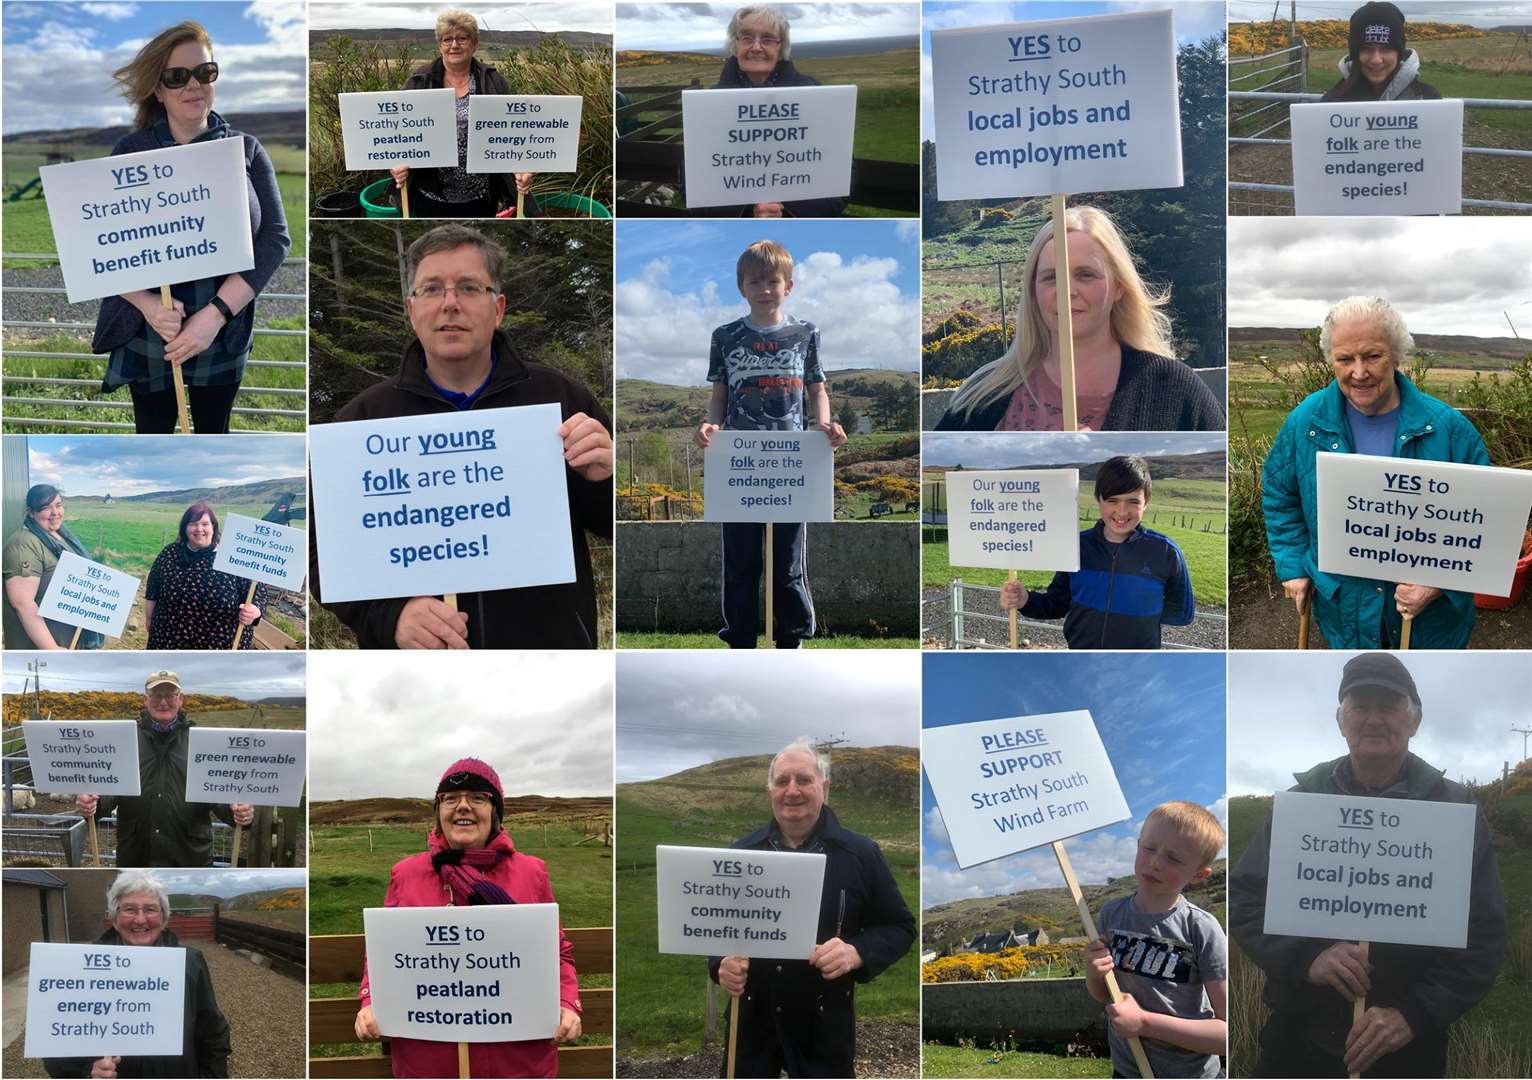 Locals carry placards to show their support for the Strathy South wind farm.